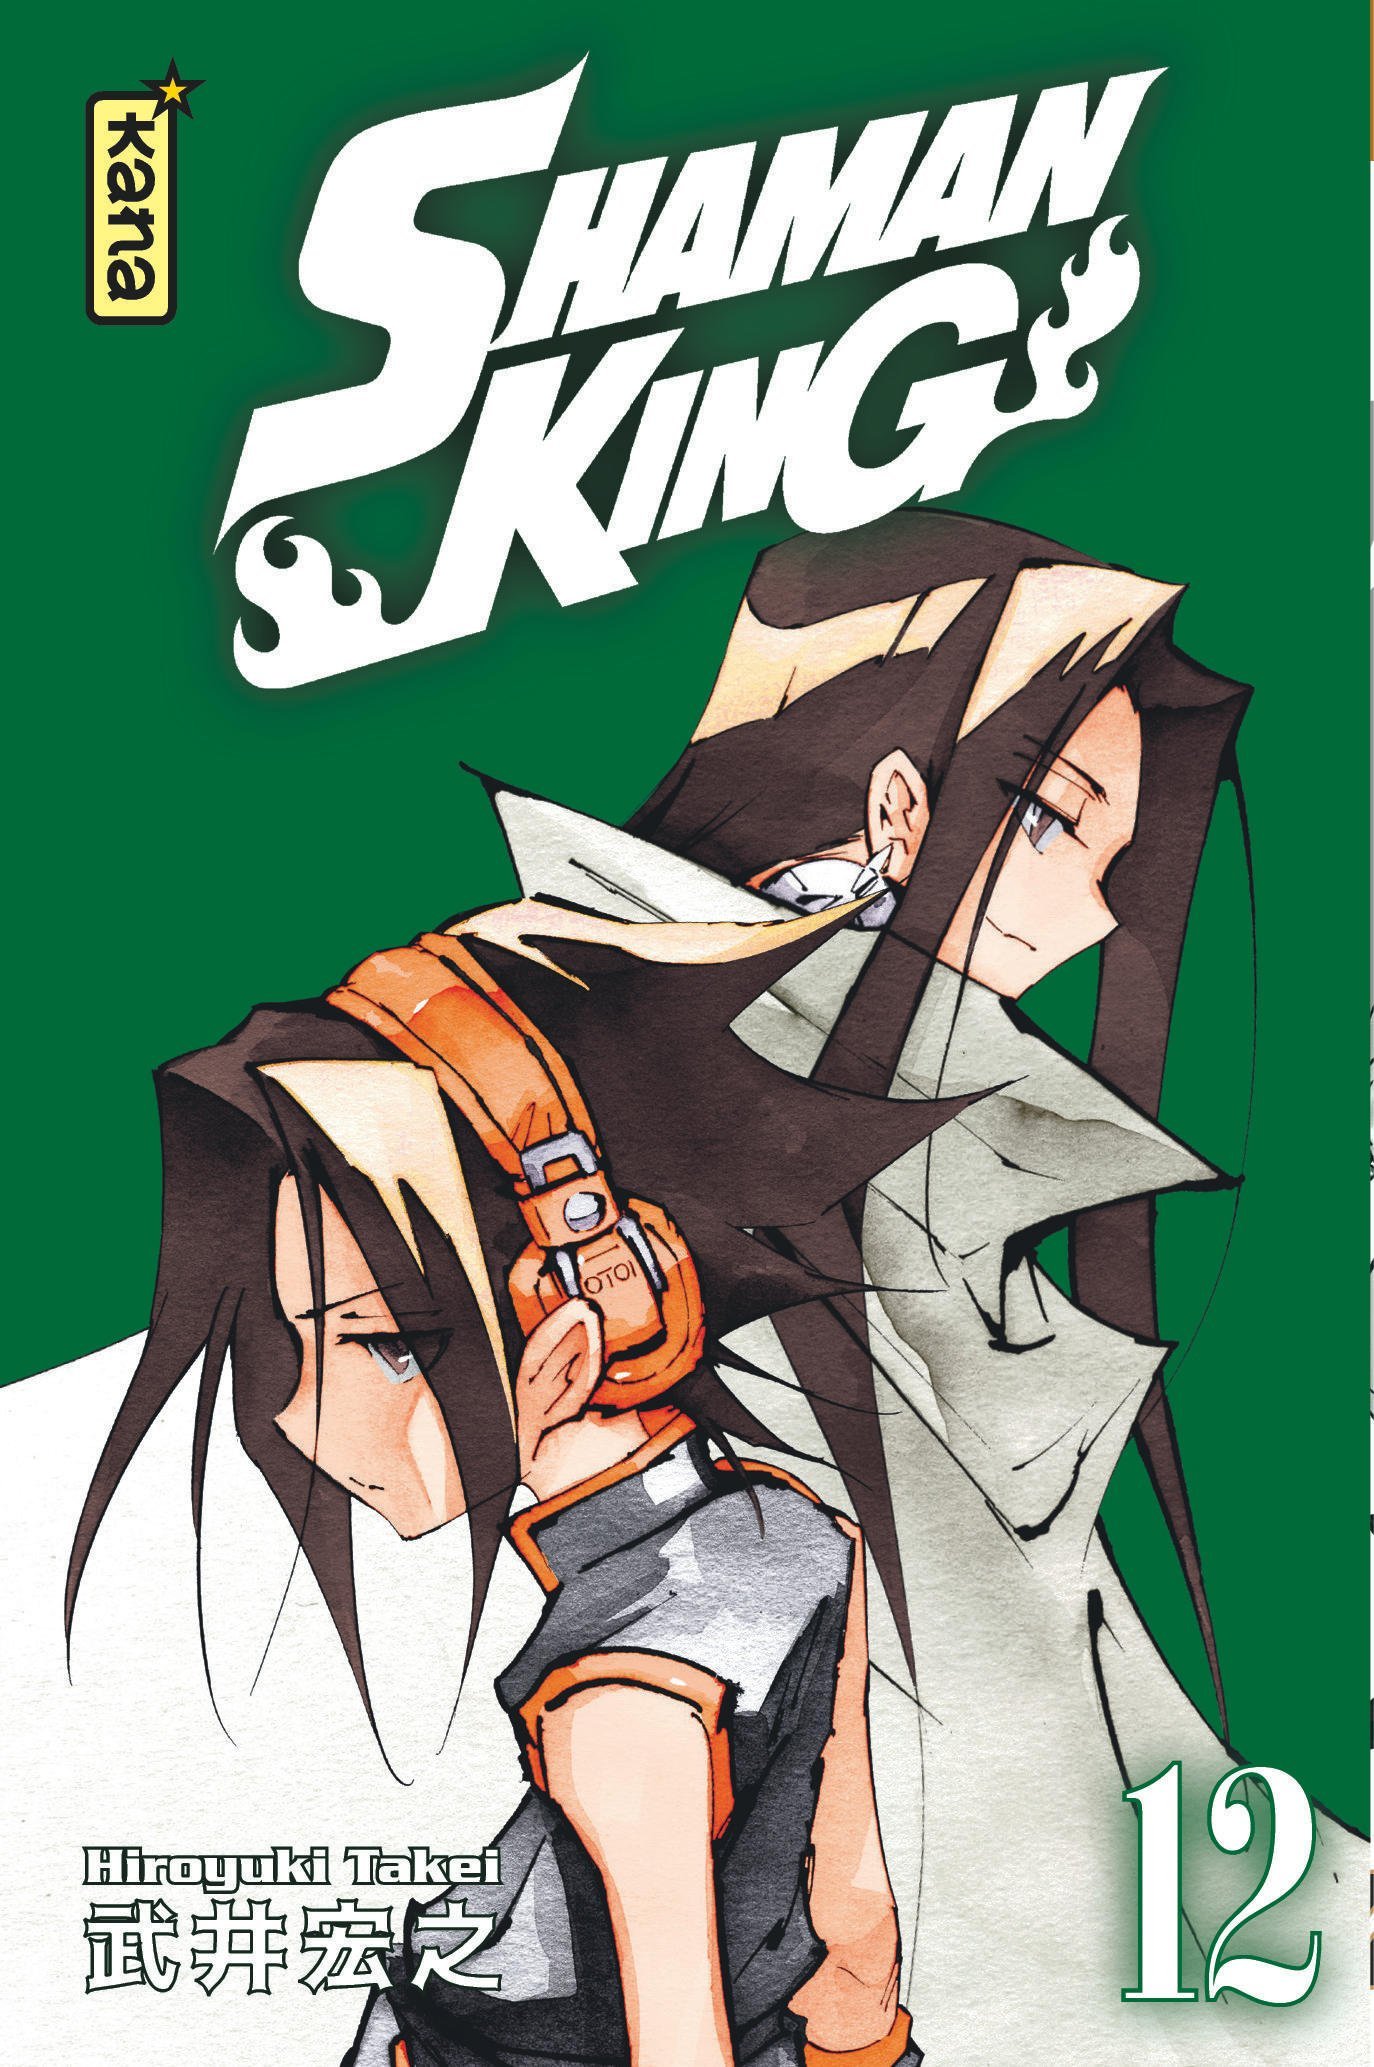 Shaman King Star Edition - Tome 12 (9782505088486-front-cover)